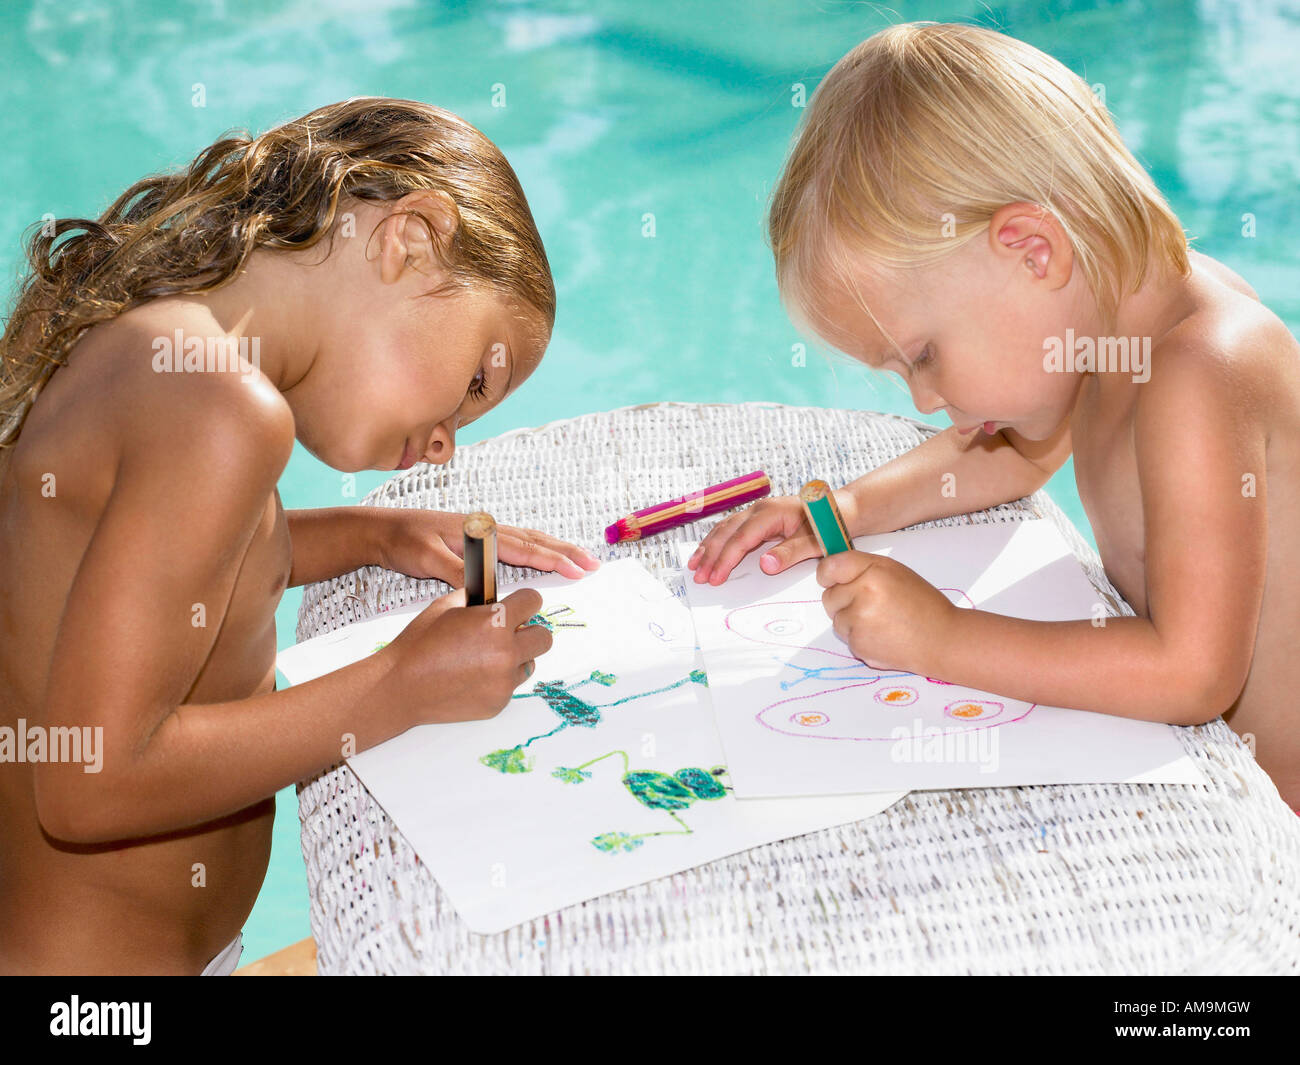 Two young children coloring by a pool. Stock Photo